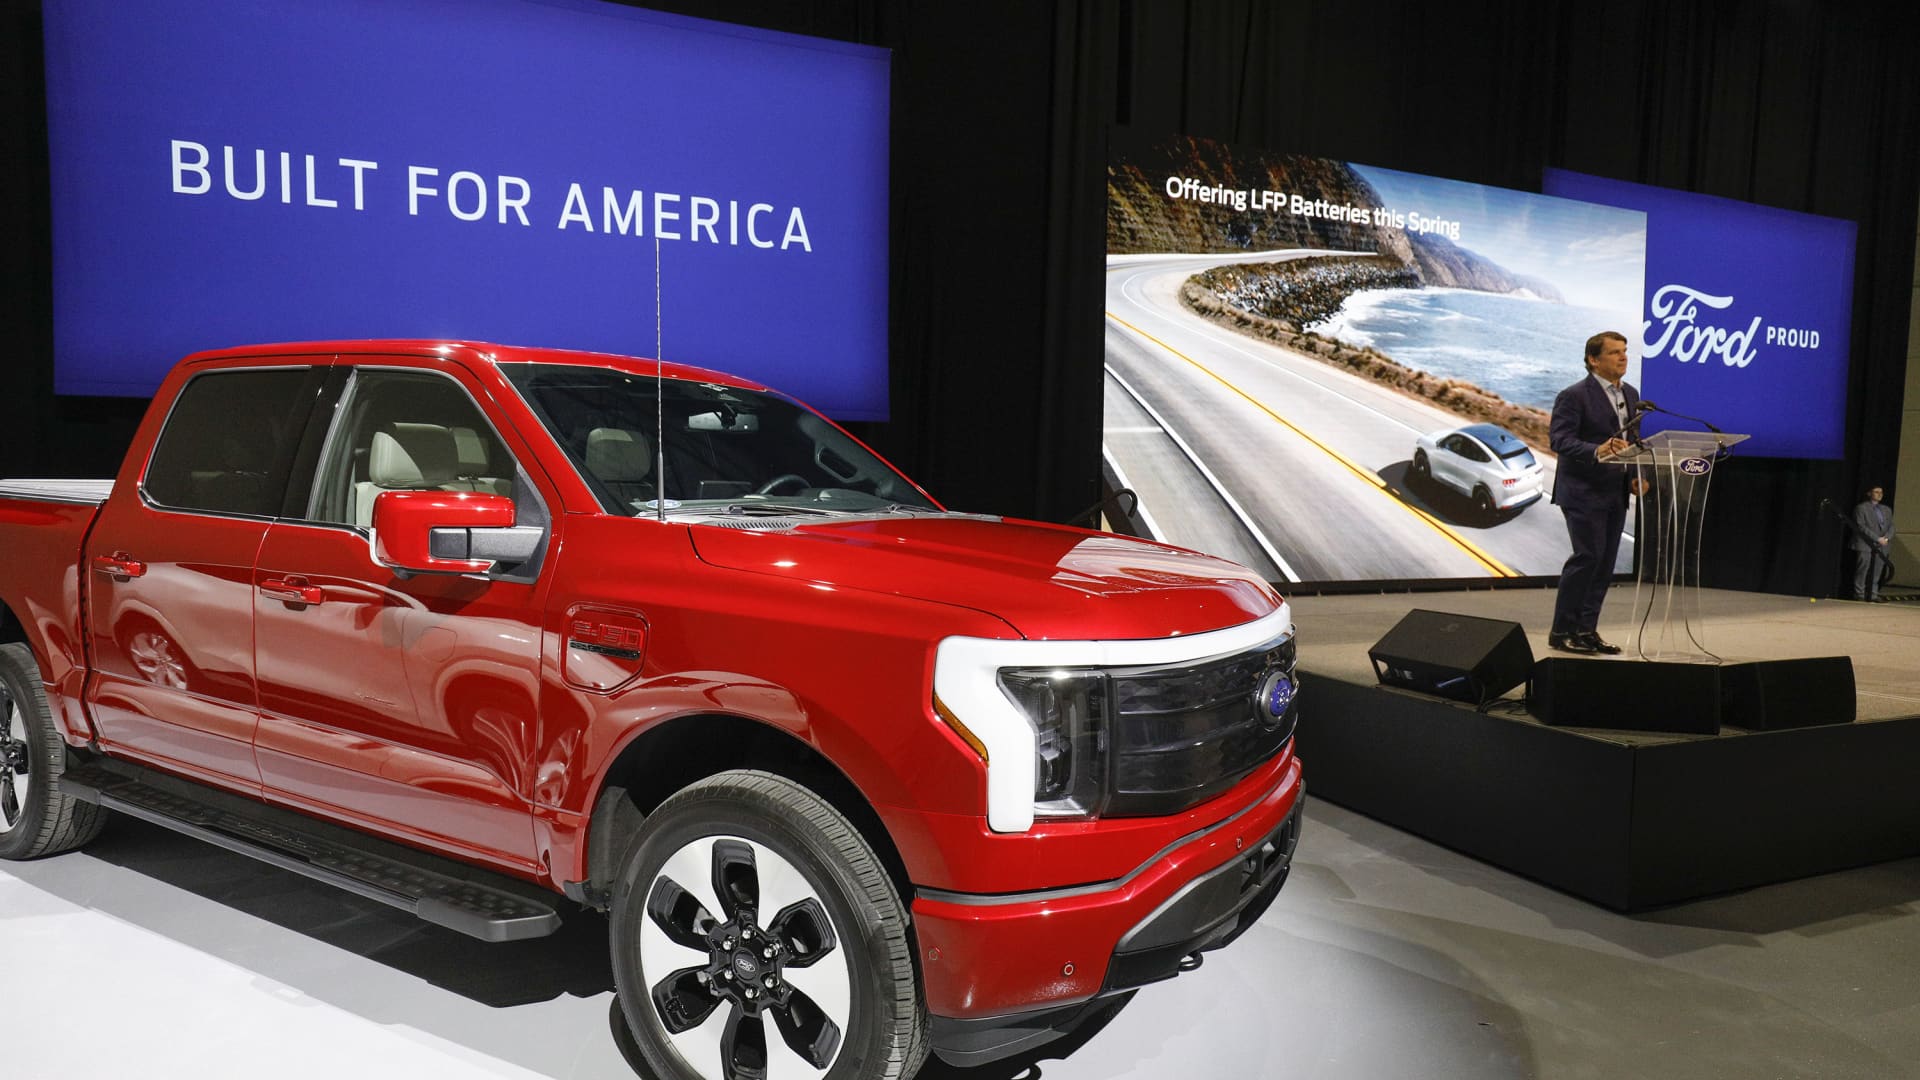 Lawmakers seek review on Ford partnership with Chinese battery supplier